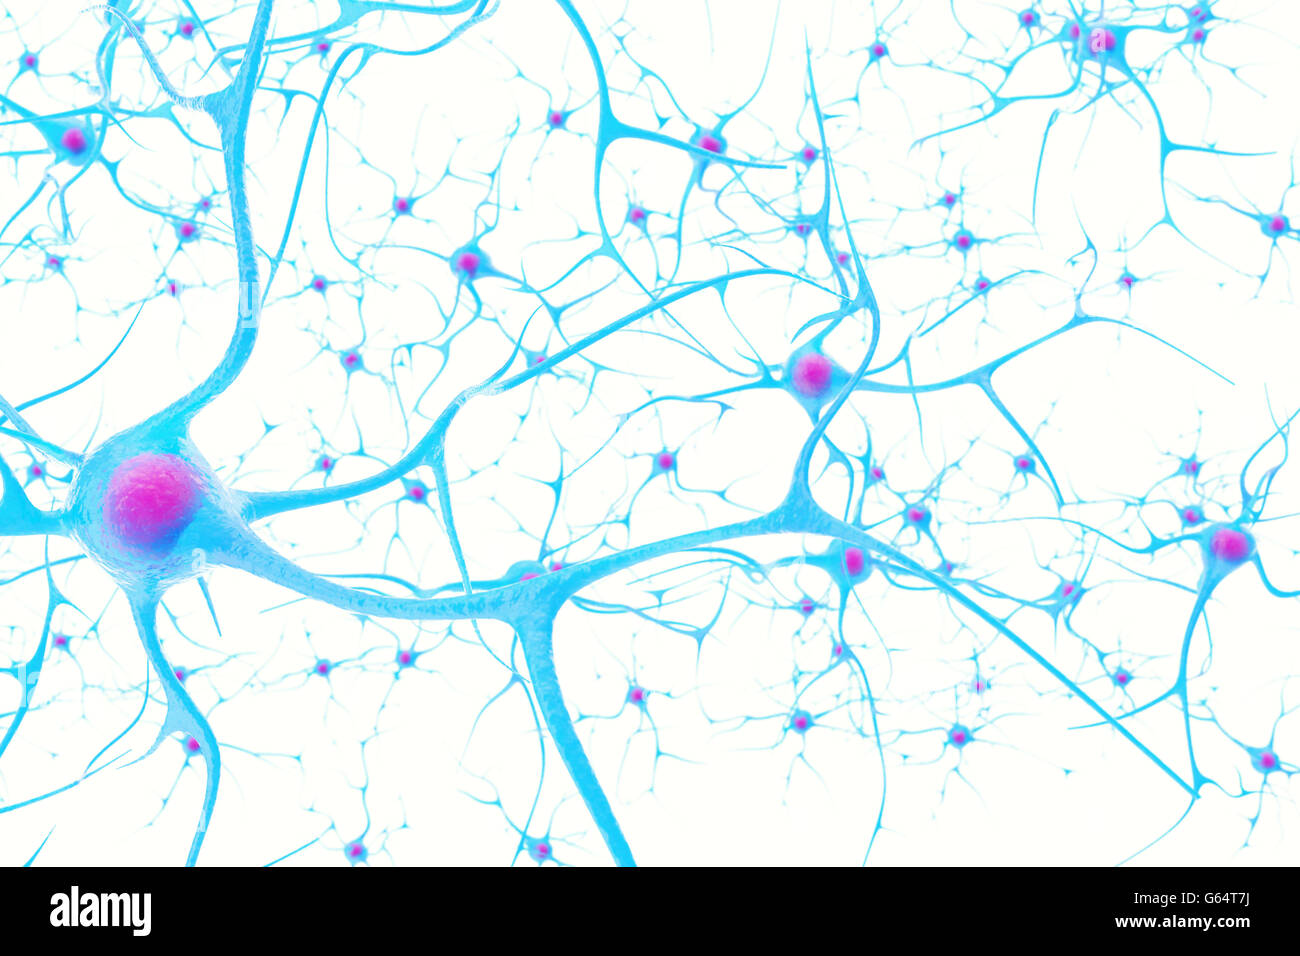 Neurons in the brain on white background with focus effect. 3d illustration Stock Photo